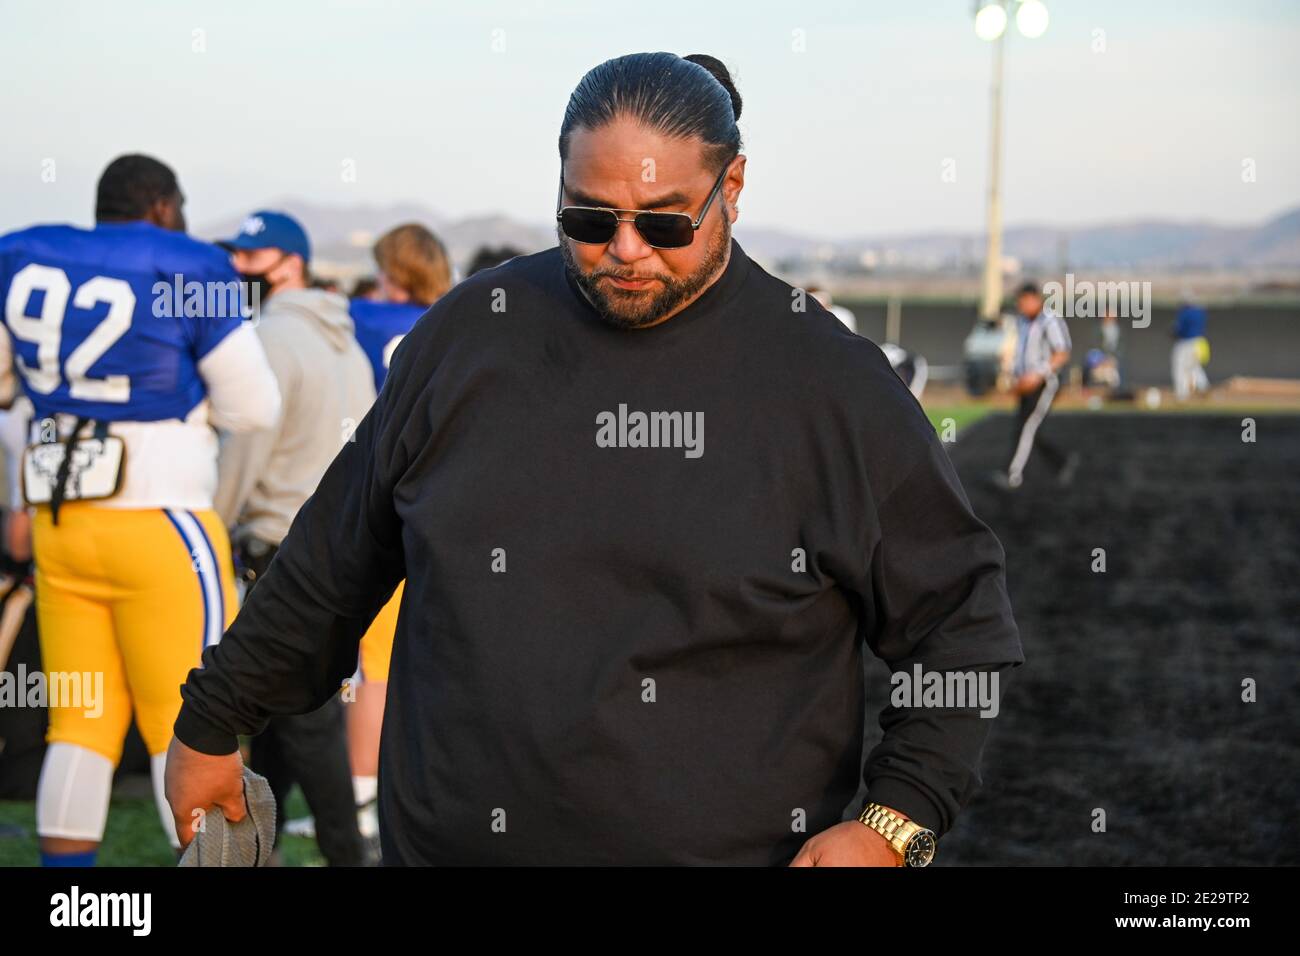 Dave Uiagalelei observes a football game, Sunday, Jan. 3, 2021, in Chino, Calif. (Dylan Stewart/Image of Sport) Stock Photo